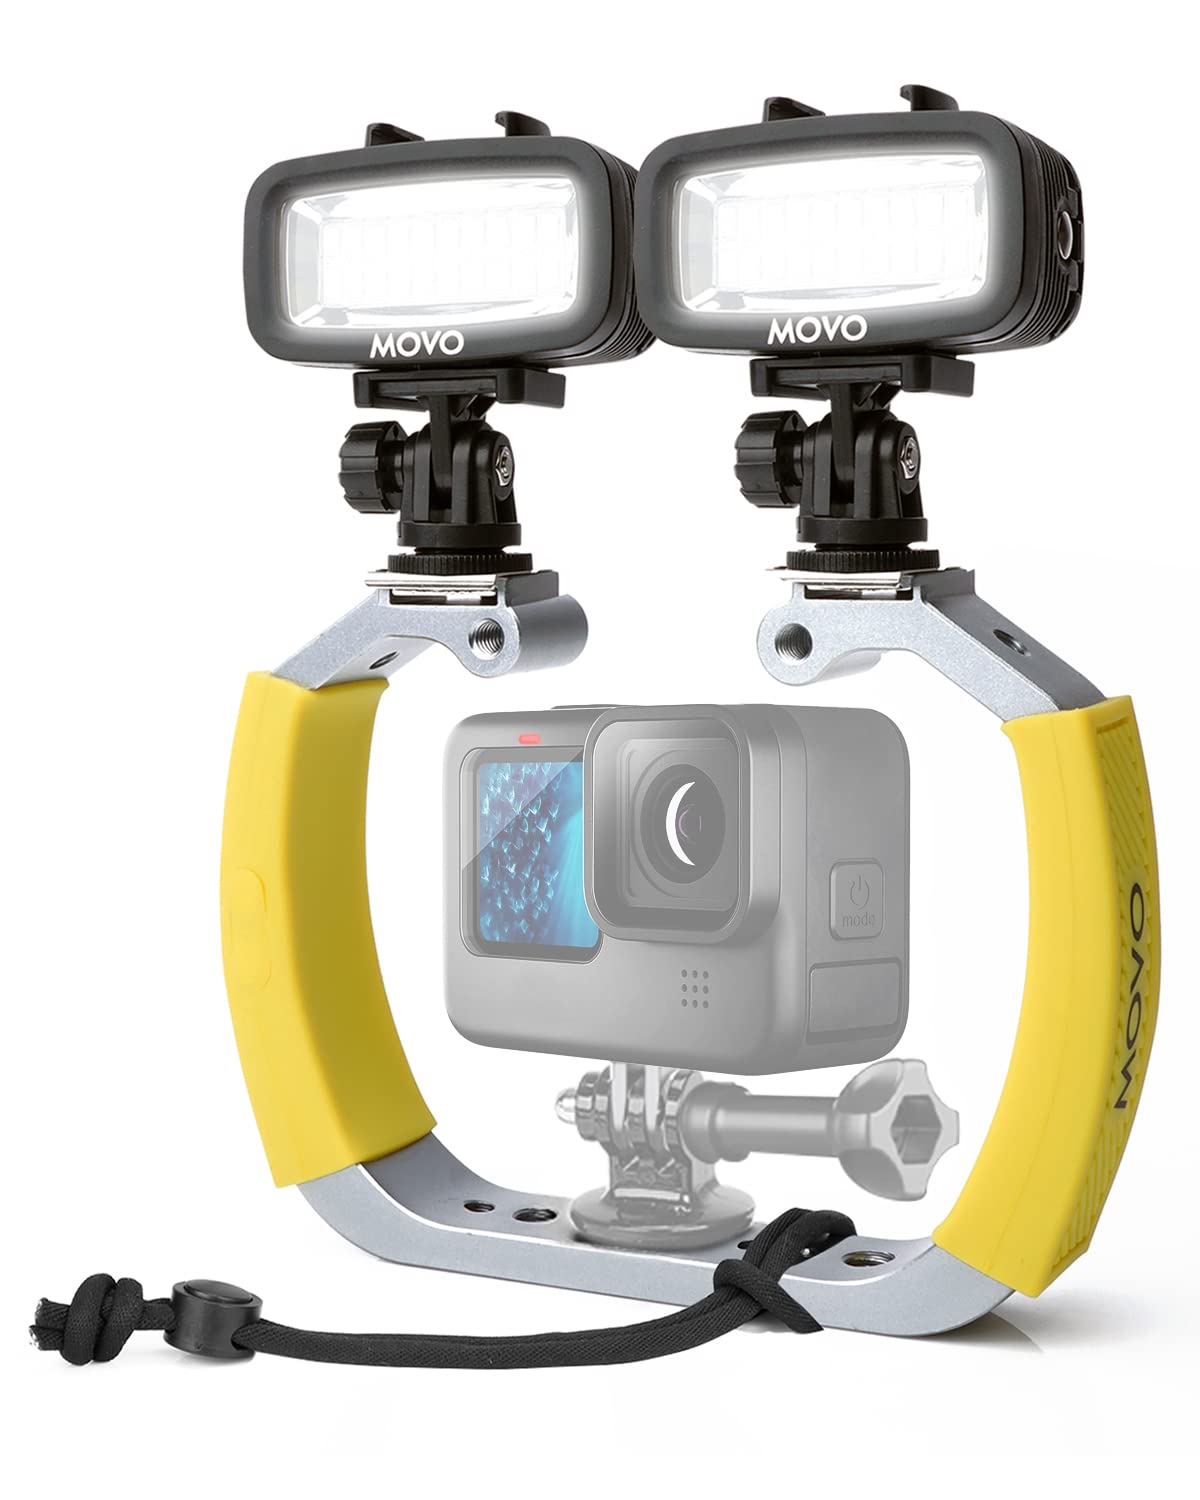 Movo DiveRig3 Diving Rig Bundle with 2 Waterproof LED Lights - Compatible with GoPro HERO3, HERO4, HERO5, HERO6, HERO7, HERO8, and DJI Osmo Action Cam - Scuba Accessories for Underwater Camera  - Very Good